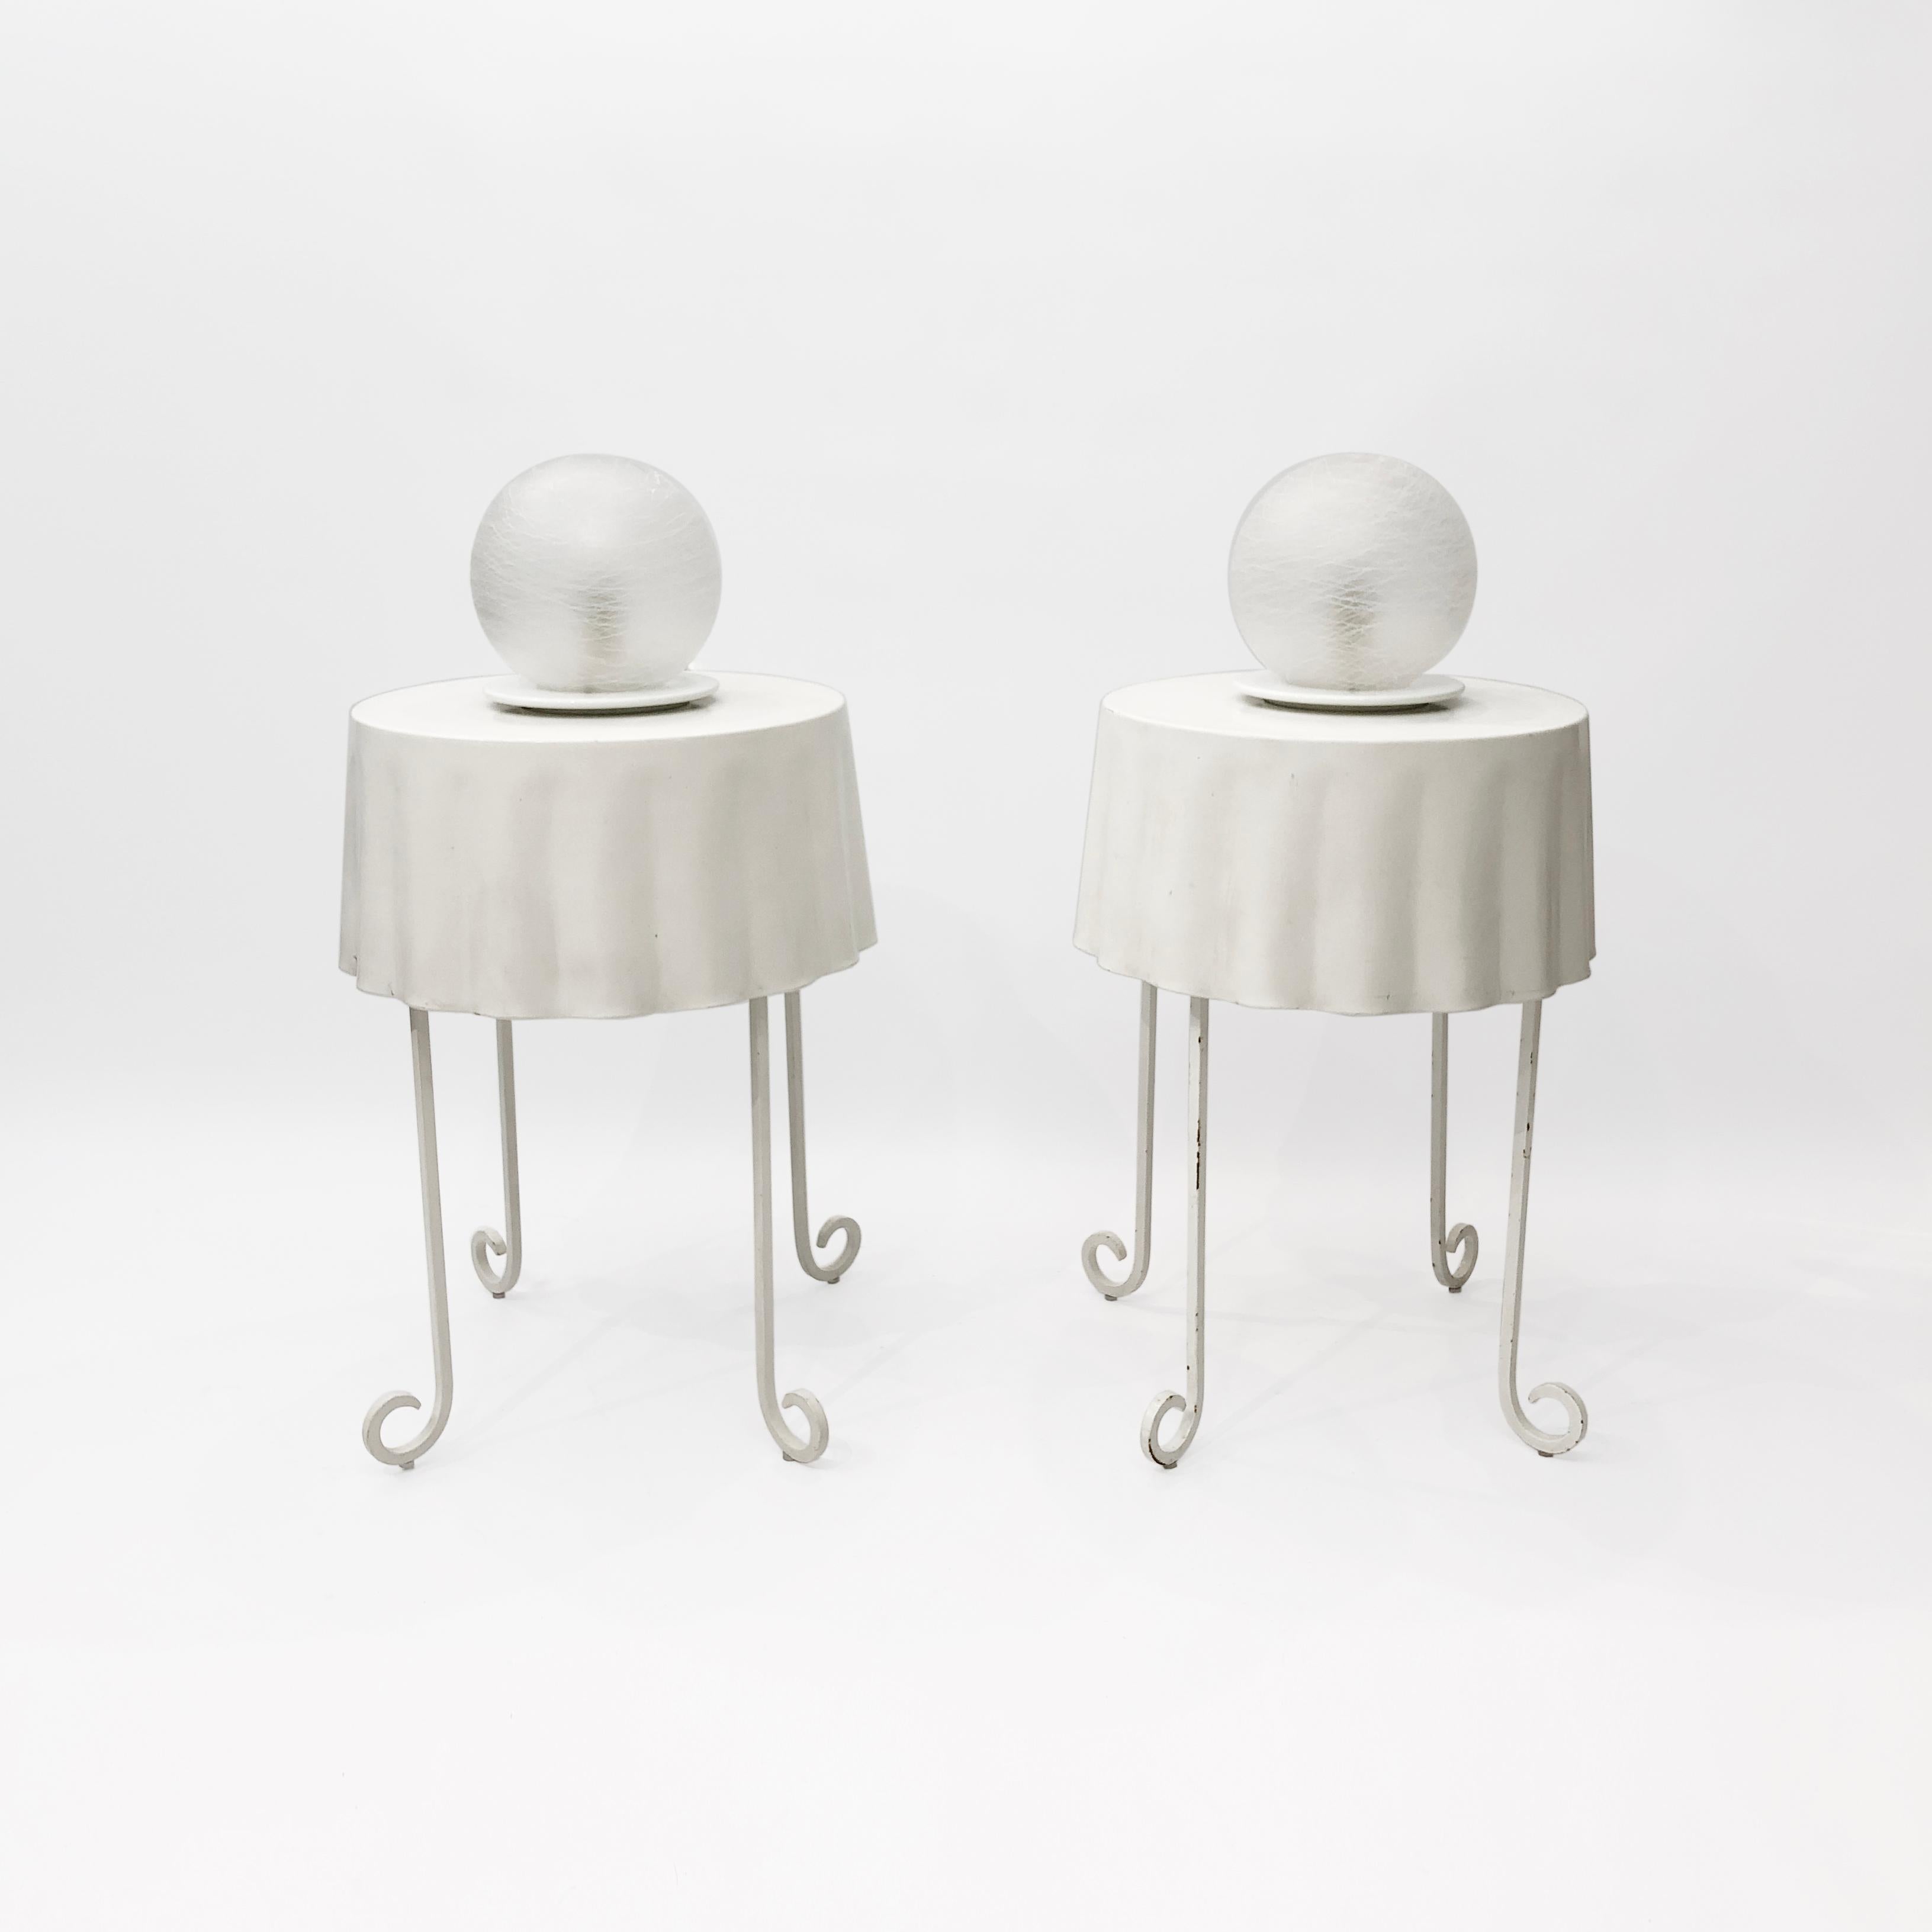 A pair of white, spherical murano glass table lamps, originating from Italy in the 1970s. Each lamp consists of a frosted glass orb sat on top of a white powder-coated metal base. The glass has been handblown, and features a frosted, fibrous